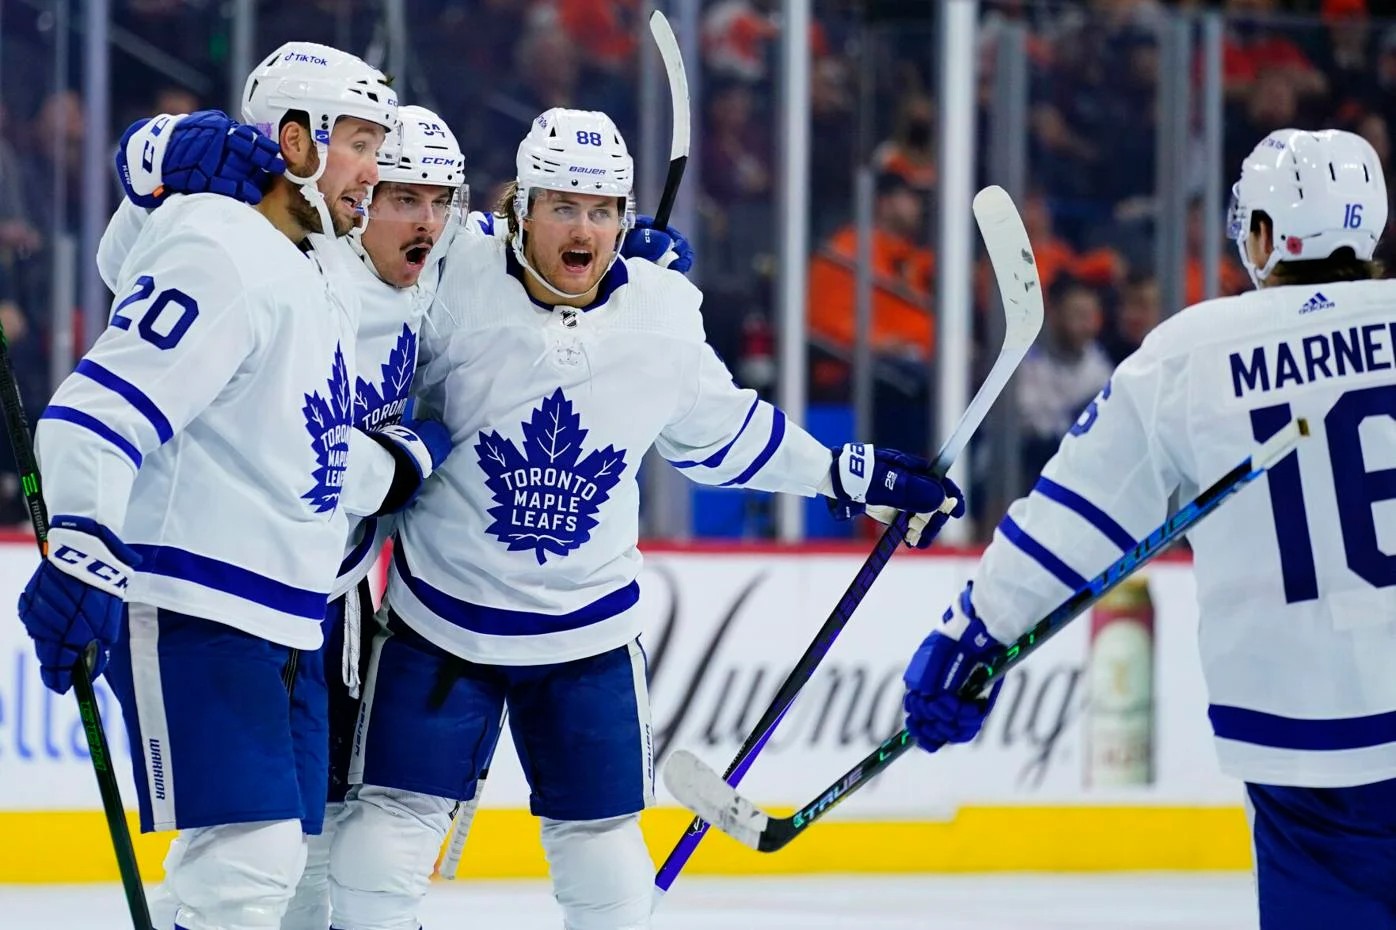 Auston Matthews tallies twice as Leafs handle Panthers - The Rink